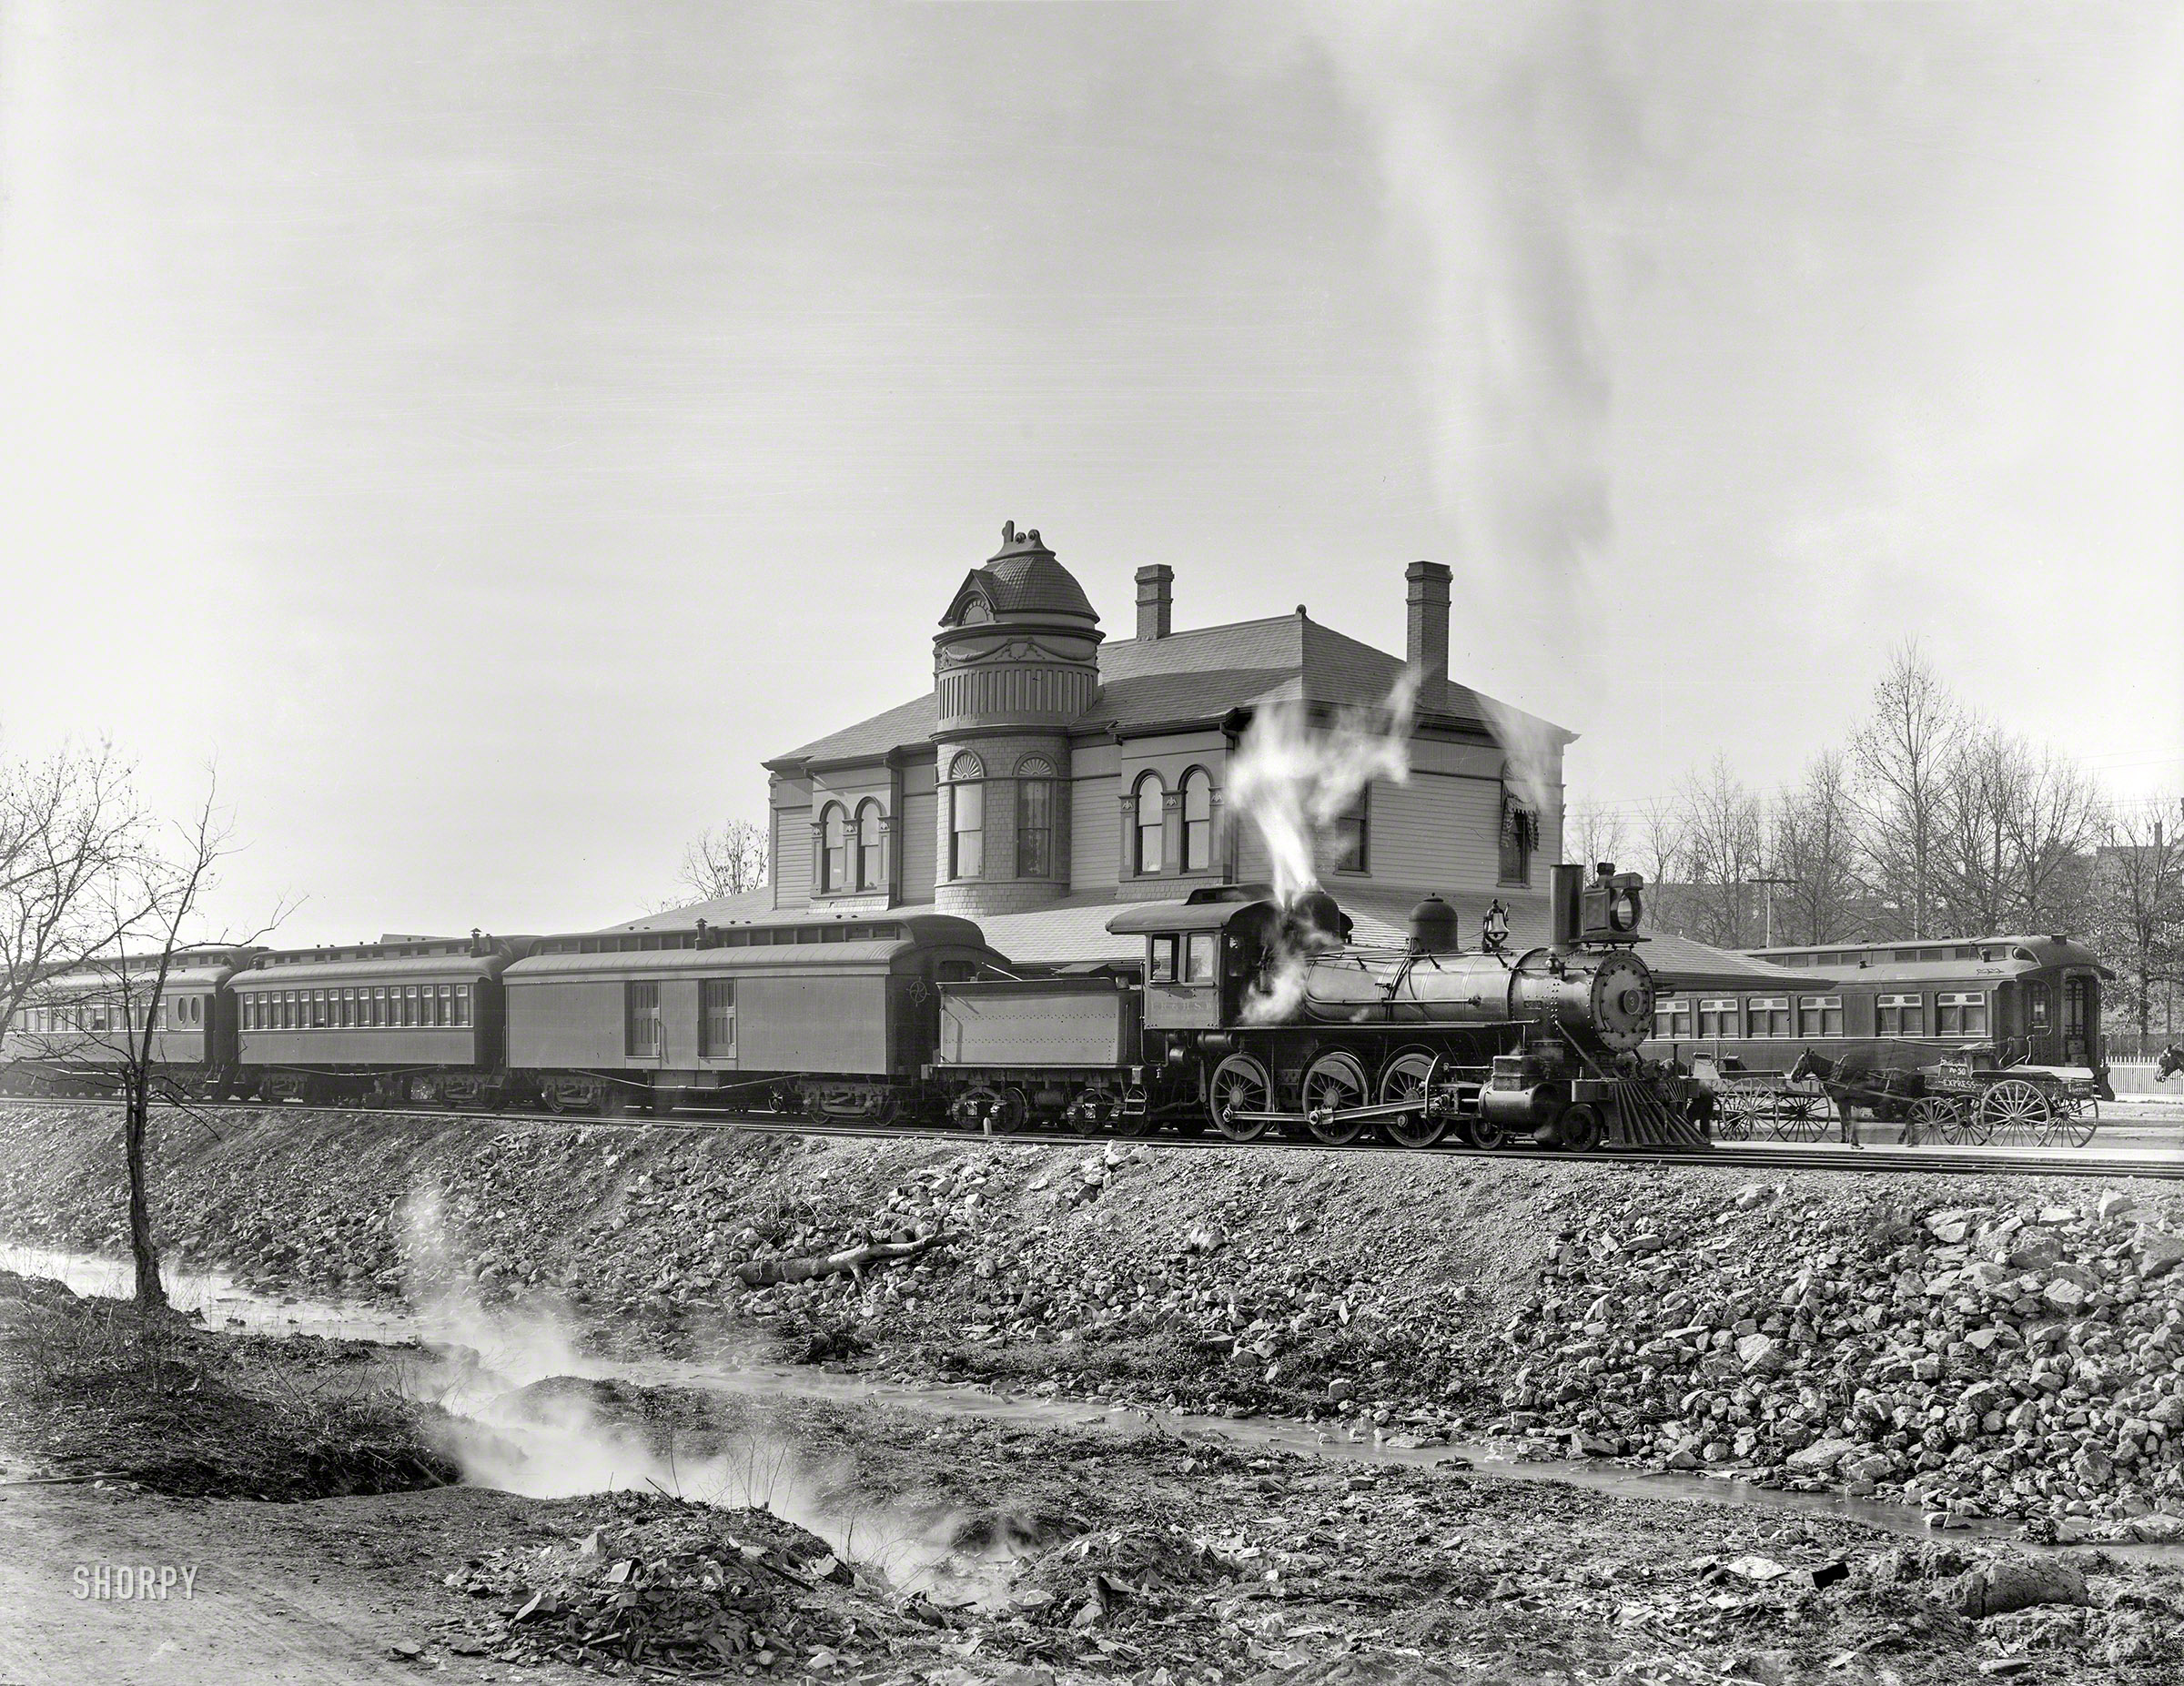 Circa 1900. "L.R. & H.S.W. R.R. Depot, Hot Springs, Arkansas." A locomotive of the Little Rock & Hot Springs Western Railroad. 8x10 inch dry plate glass negative, Detroit Photographic Company. View full size.